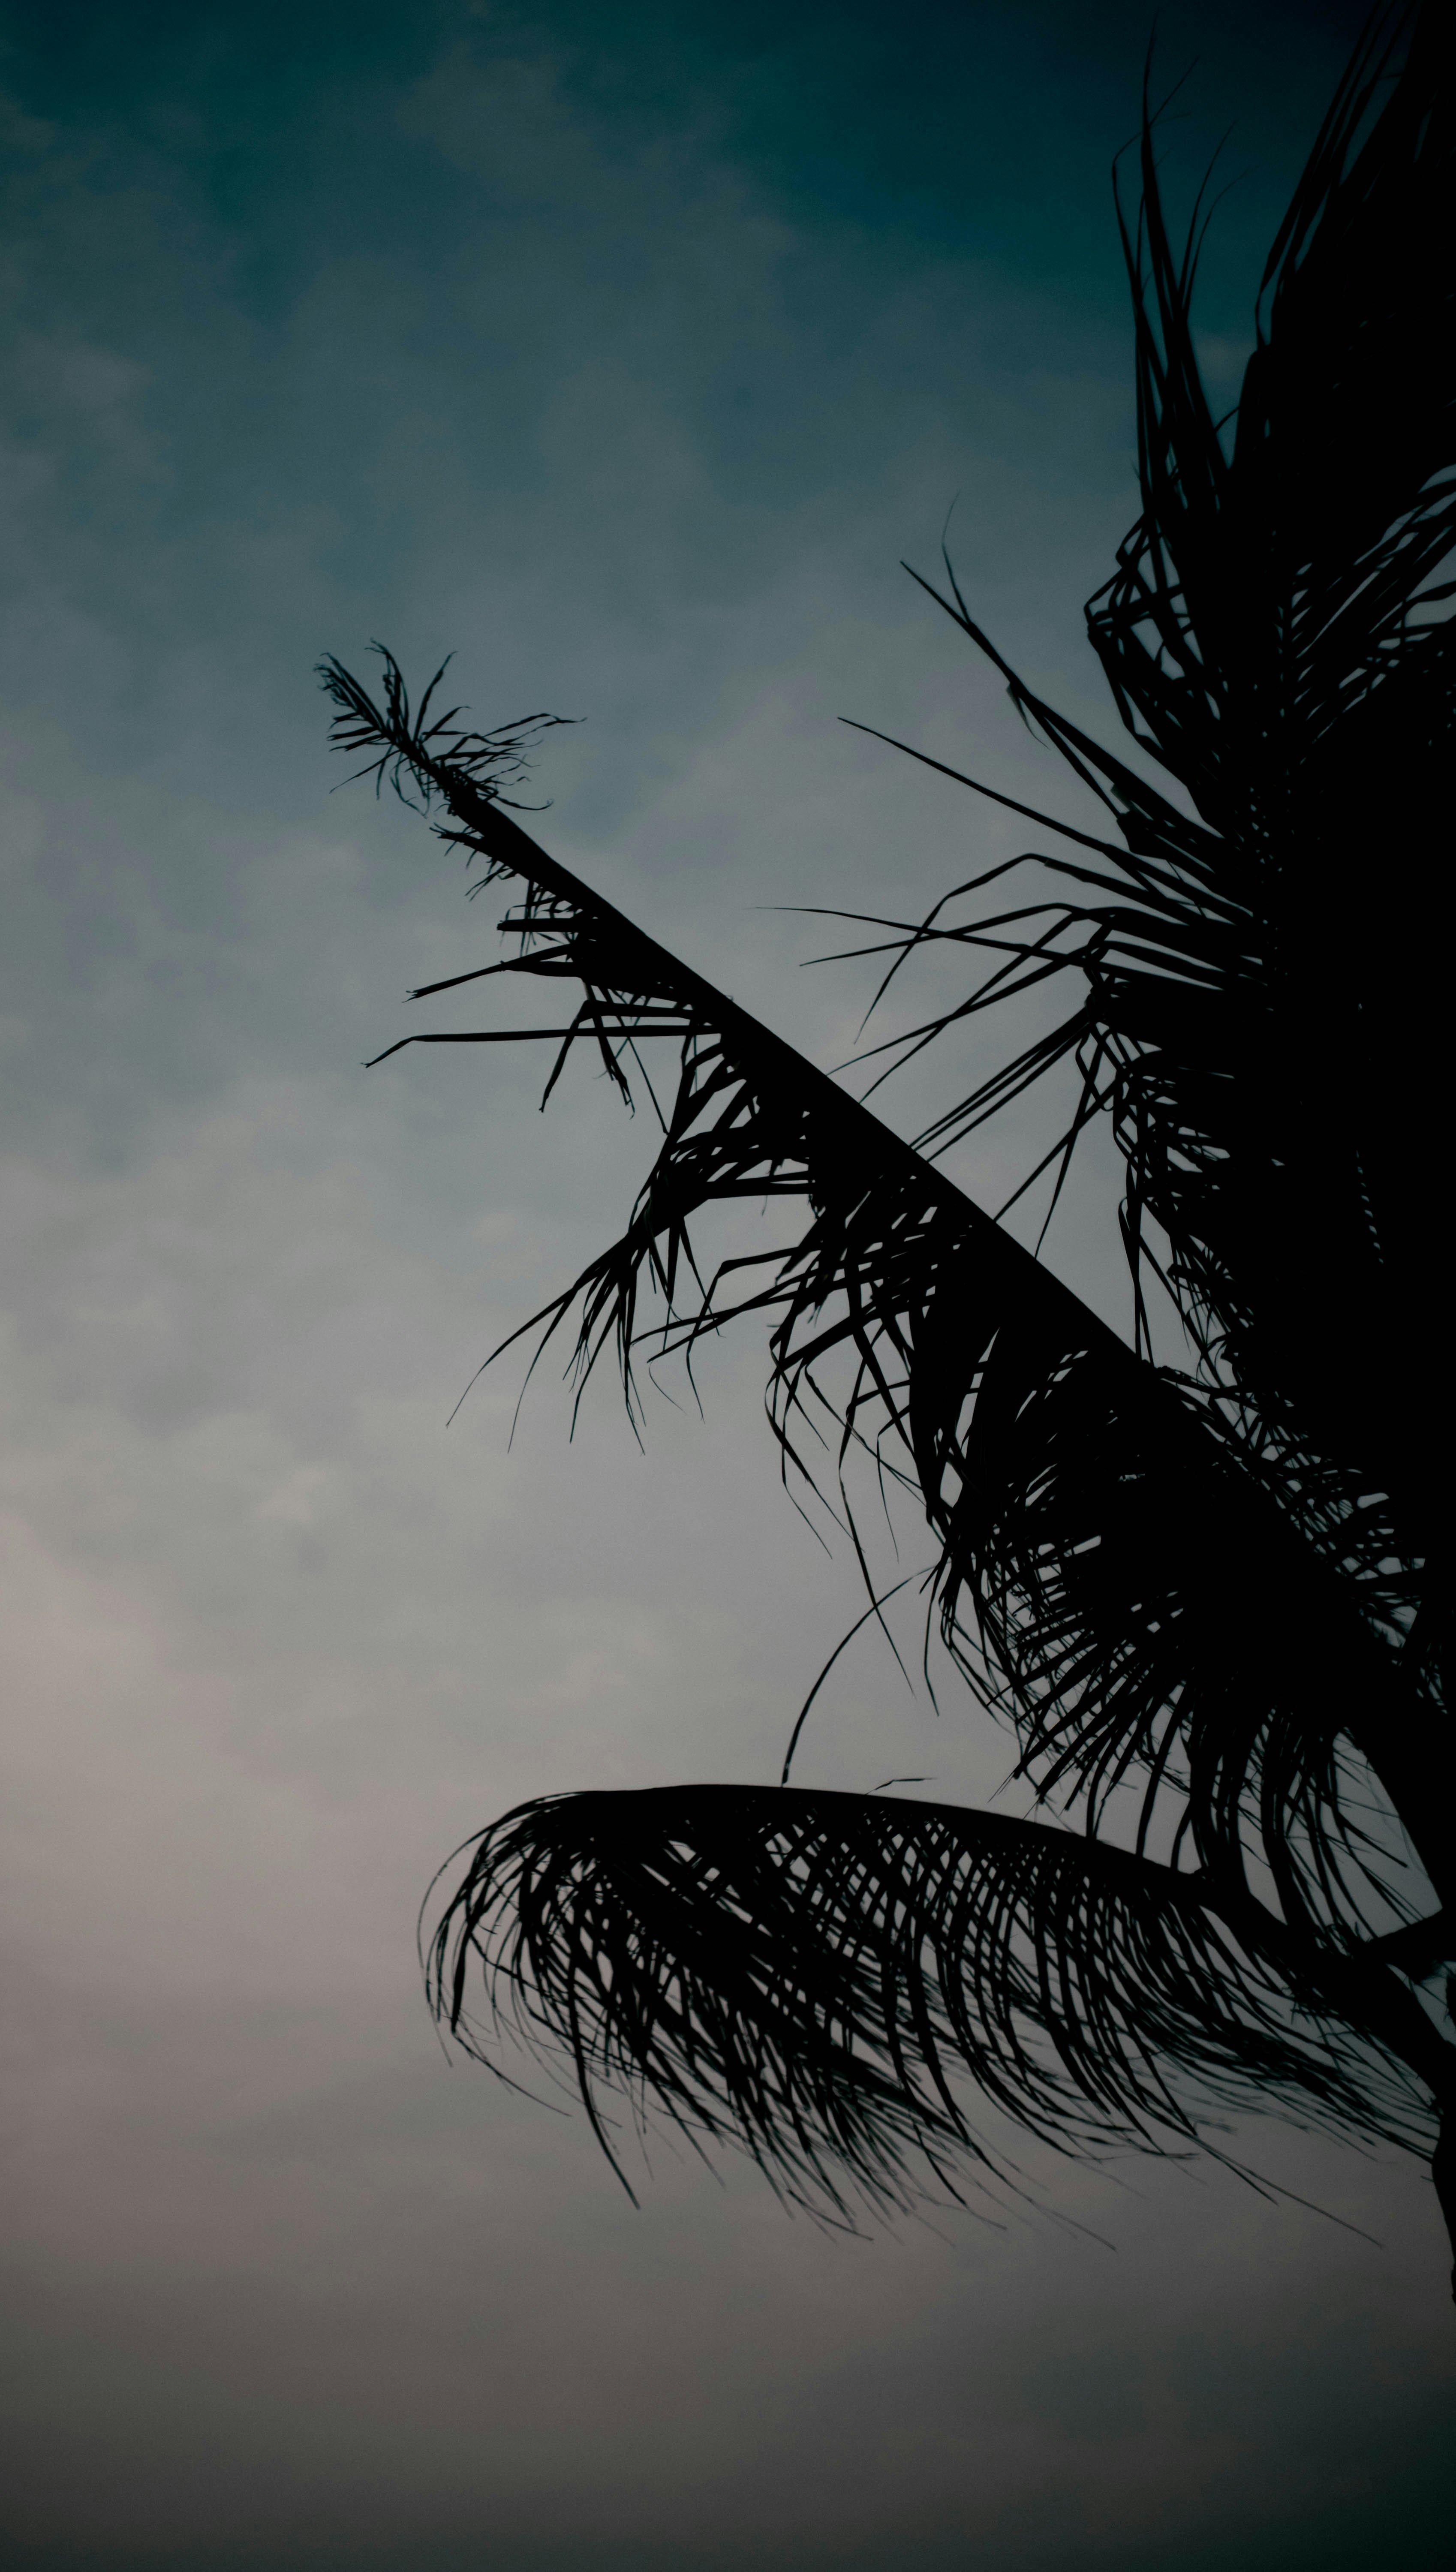 palm tree under cloudy sky during daytime